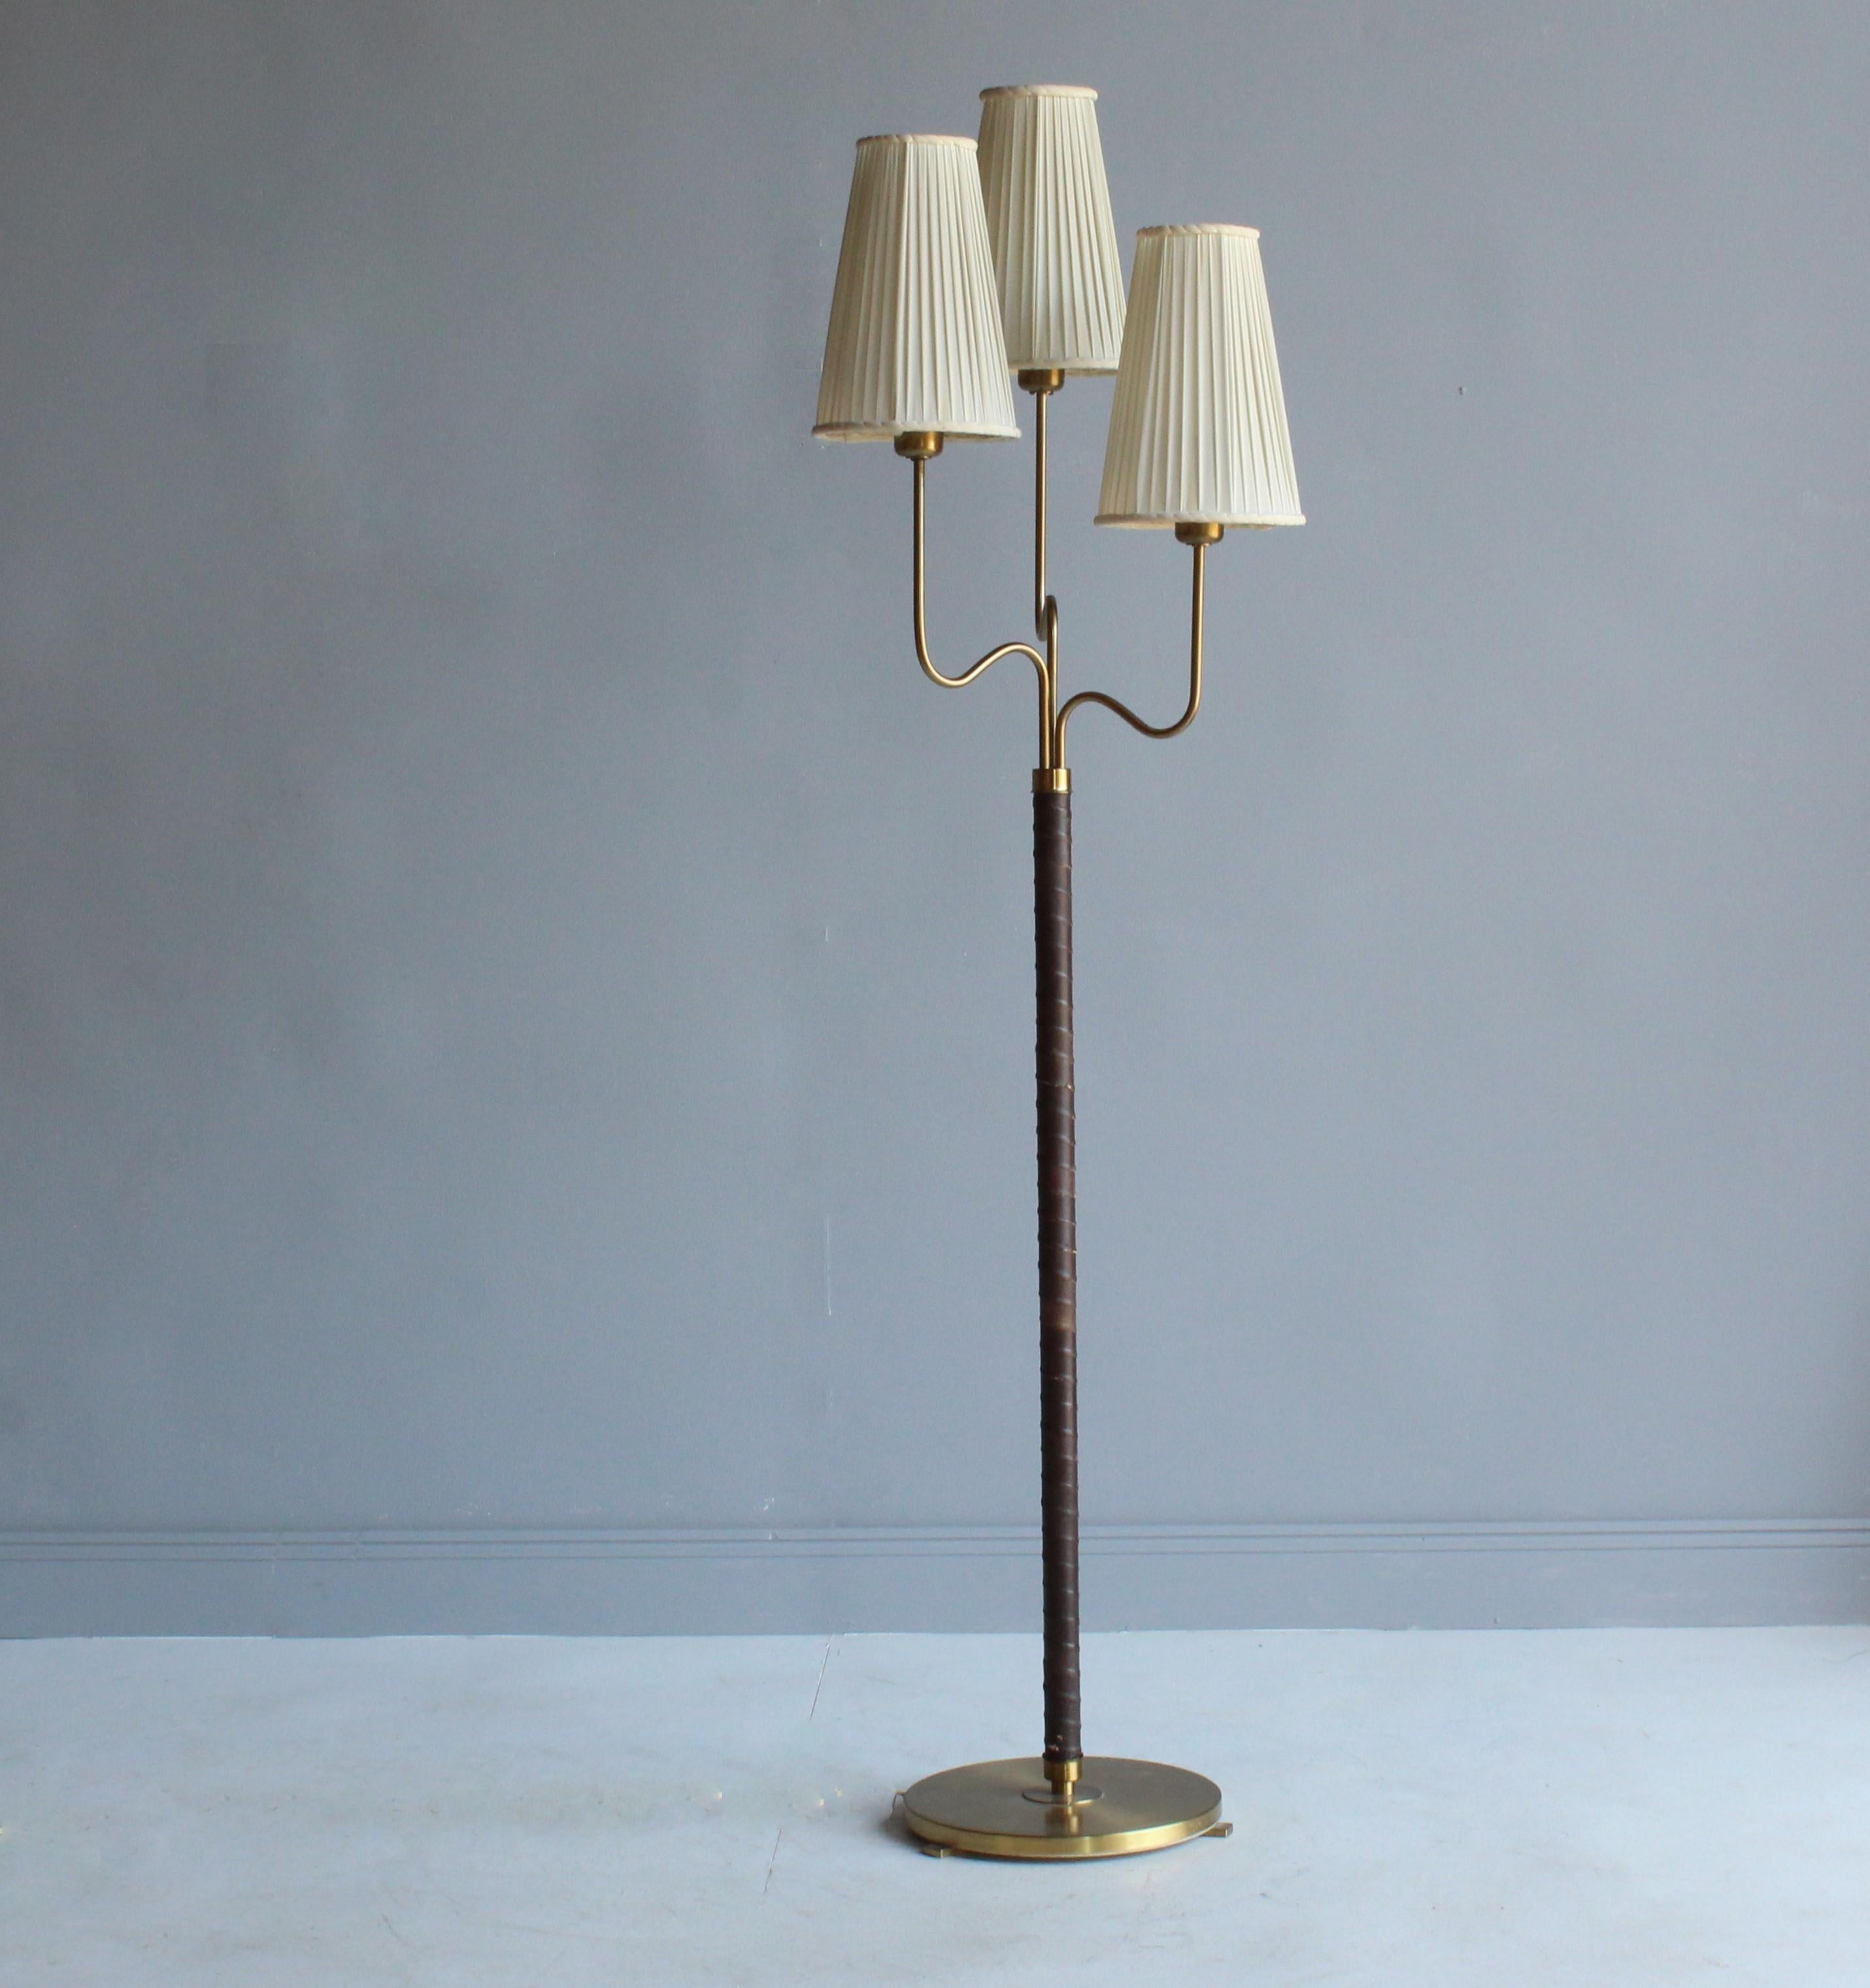 A rare floor lamp with 3 organic arms, designed by Hans Bergström in 1946. Produced by ASEA. 

Bears original screens and original dark brown leather. 

Other designers of the period include Paavo Tynell, Josef Frank, Carl-Axel Acking, Alvar